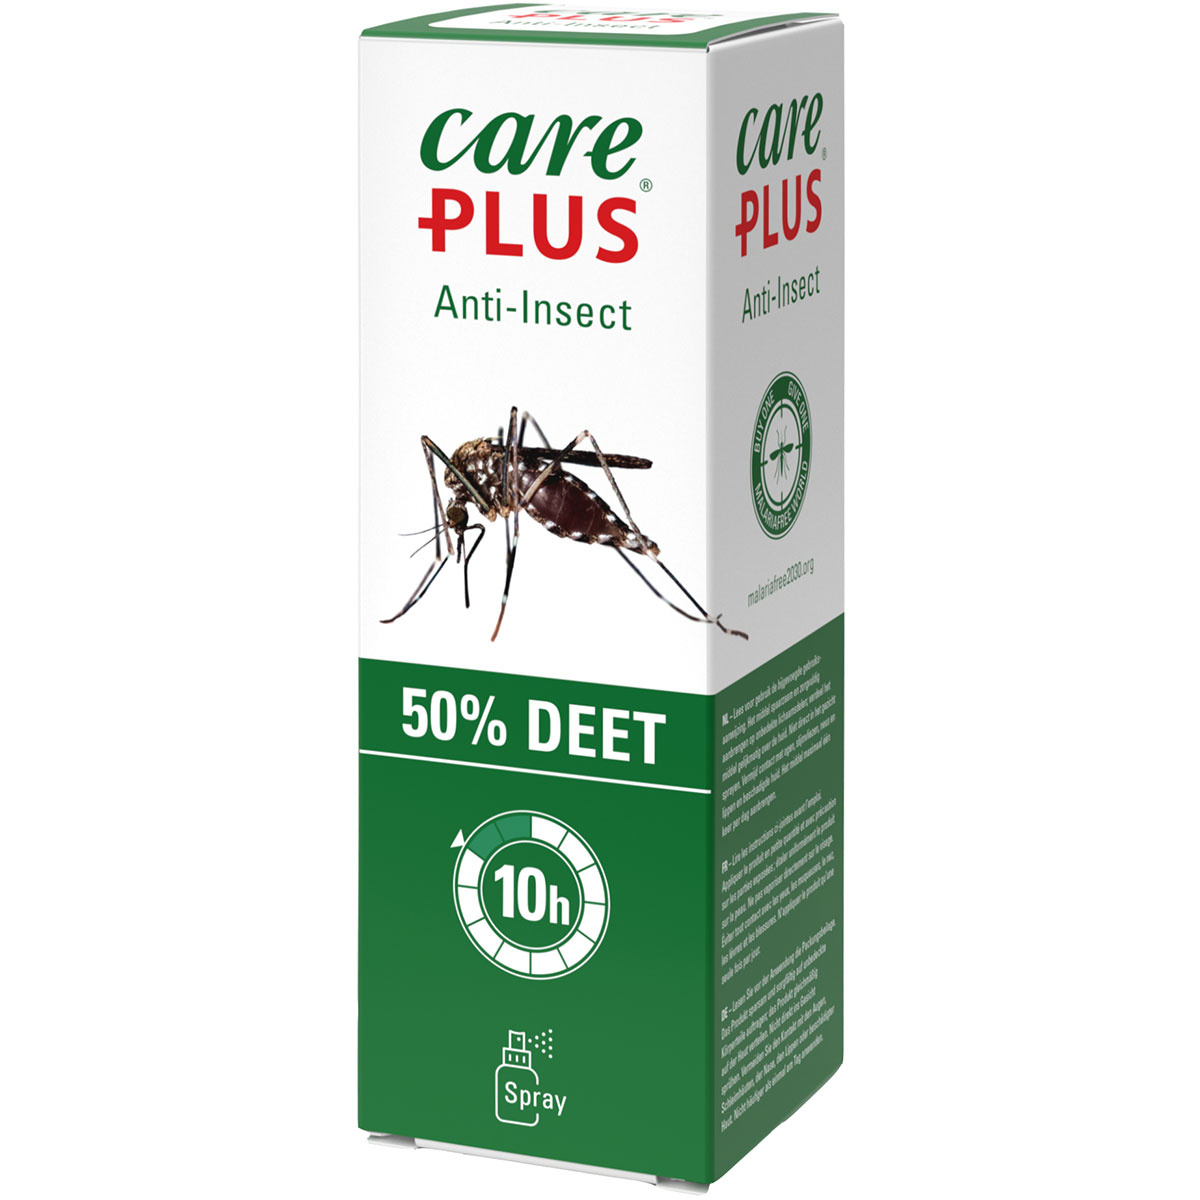 Care Plus Anti-Insect DEET Spray 50% 2